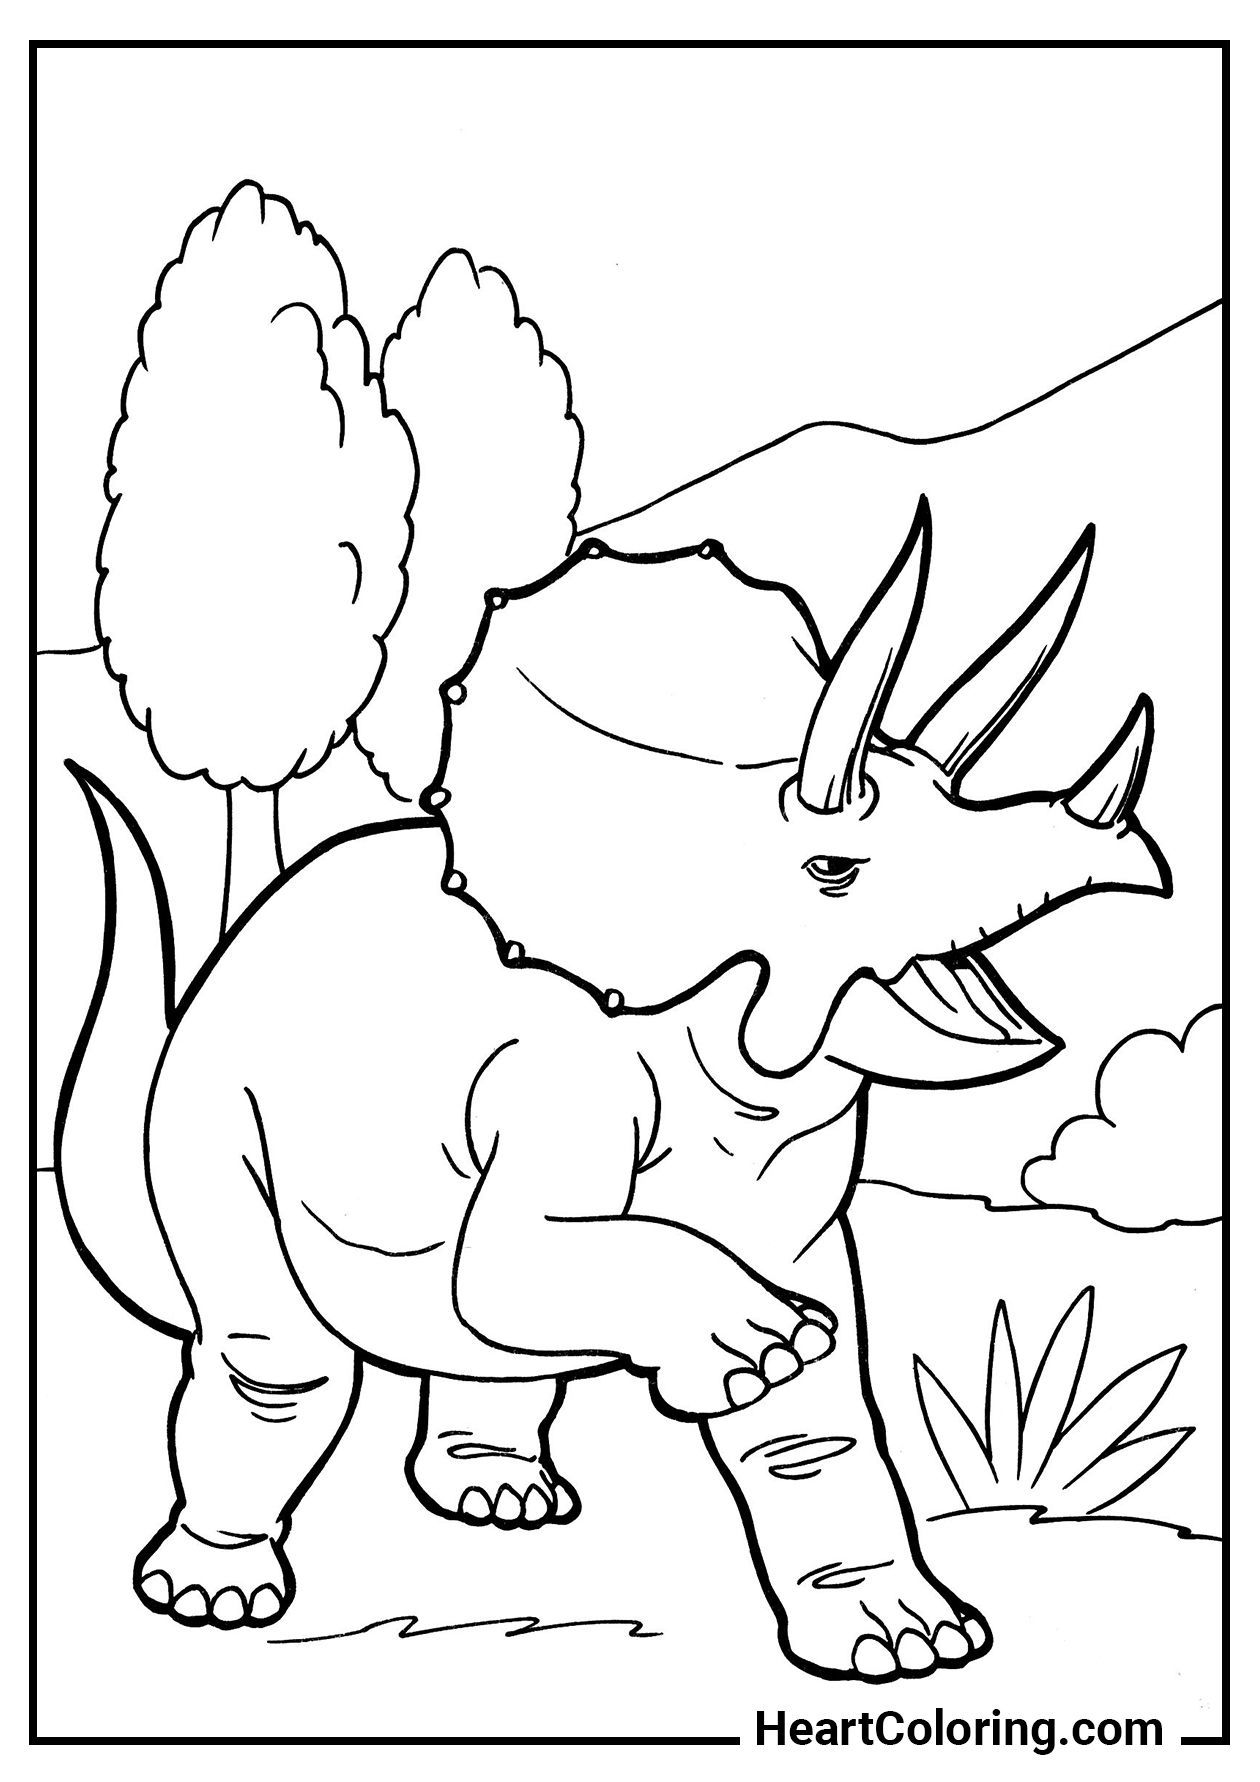 99+ Cute Dinosaur Coloring Pages 45